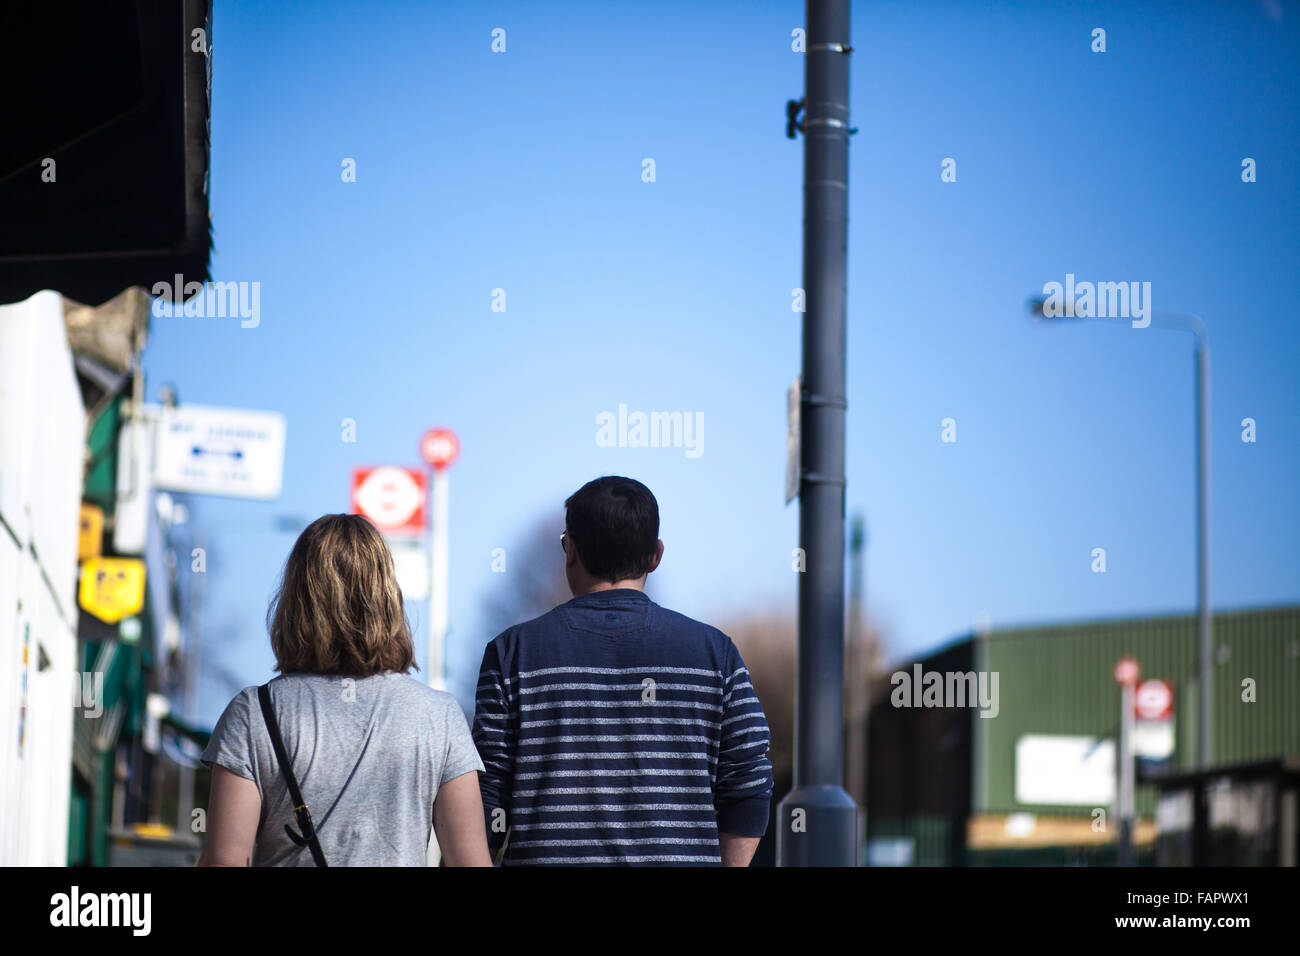 Man and woman walking down street with bus stops and blue sky in distance. Stock Photo